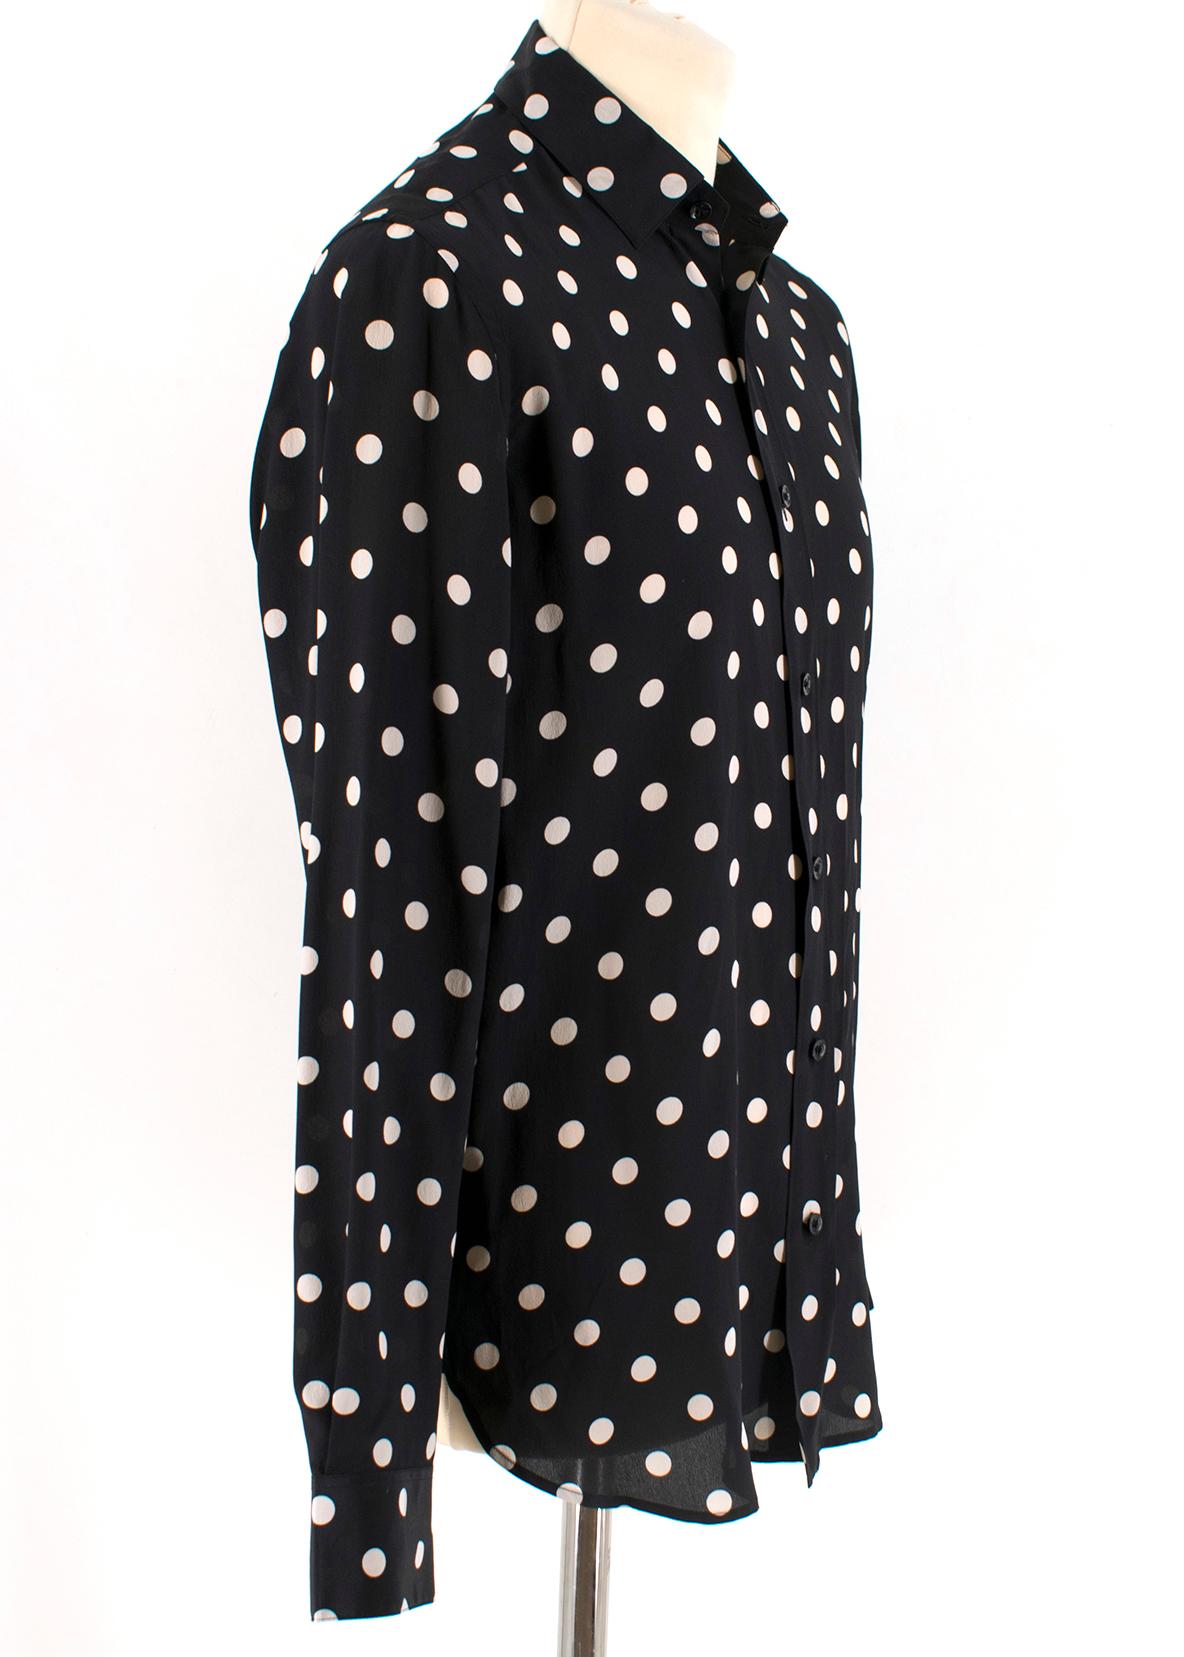 Saint Laurent Silk Polka Dot Shirt 

Long sleeve button front shirt 
Pointed collar
Polka dot print
Straight shoulders
Single button mitered cuff
Double pleat on sleeve placket

Please note, these items are pre-owned and may show some signs of